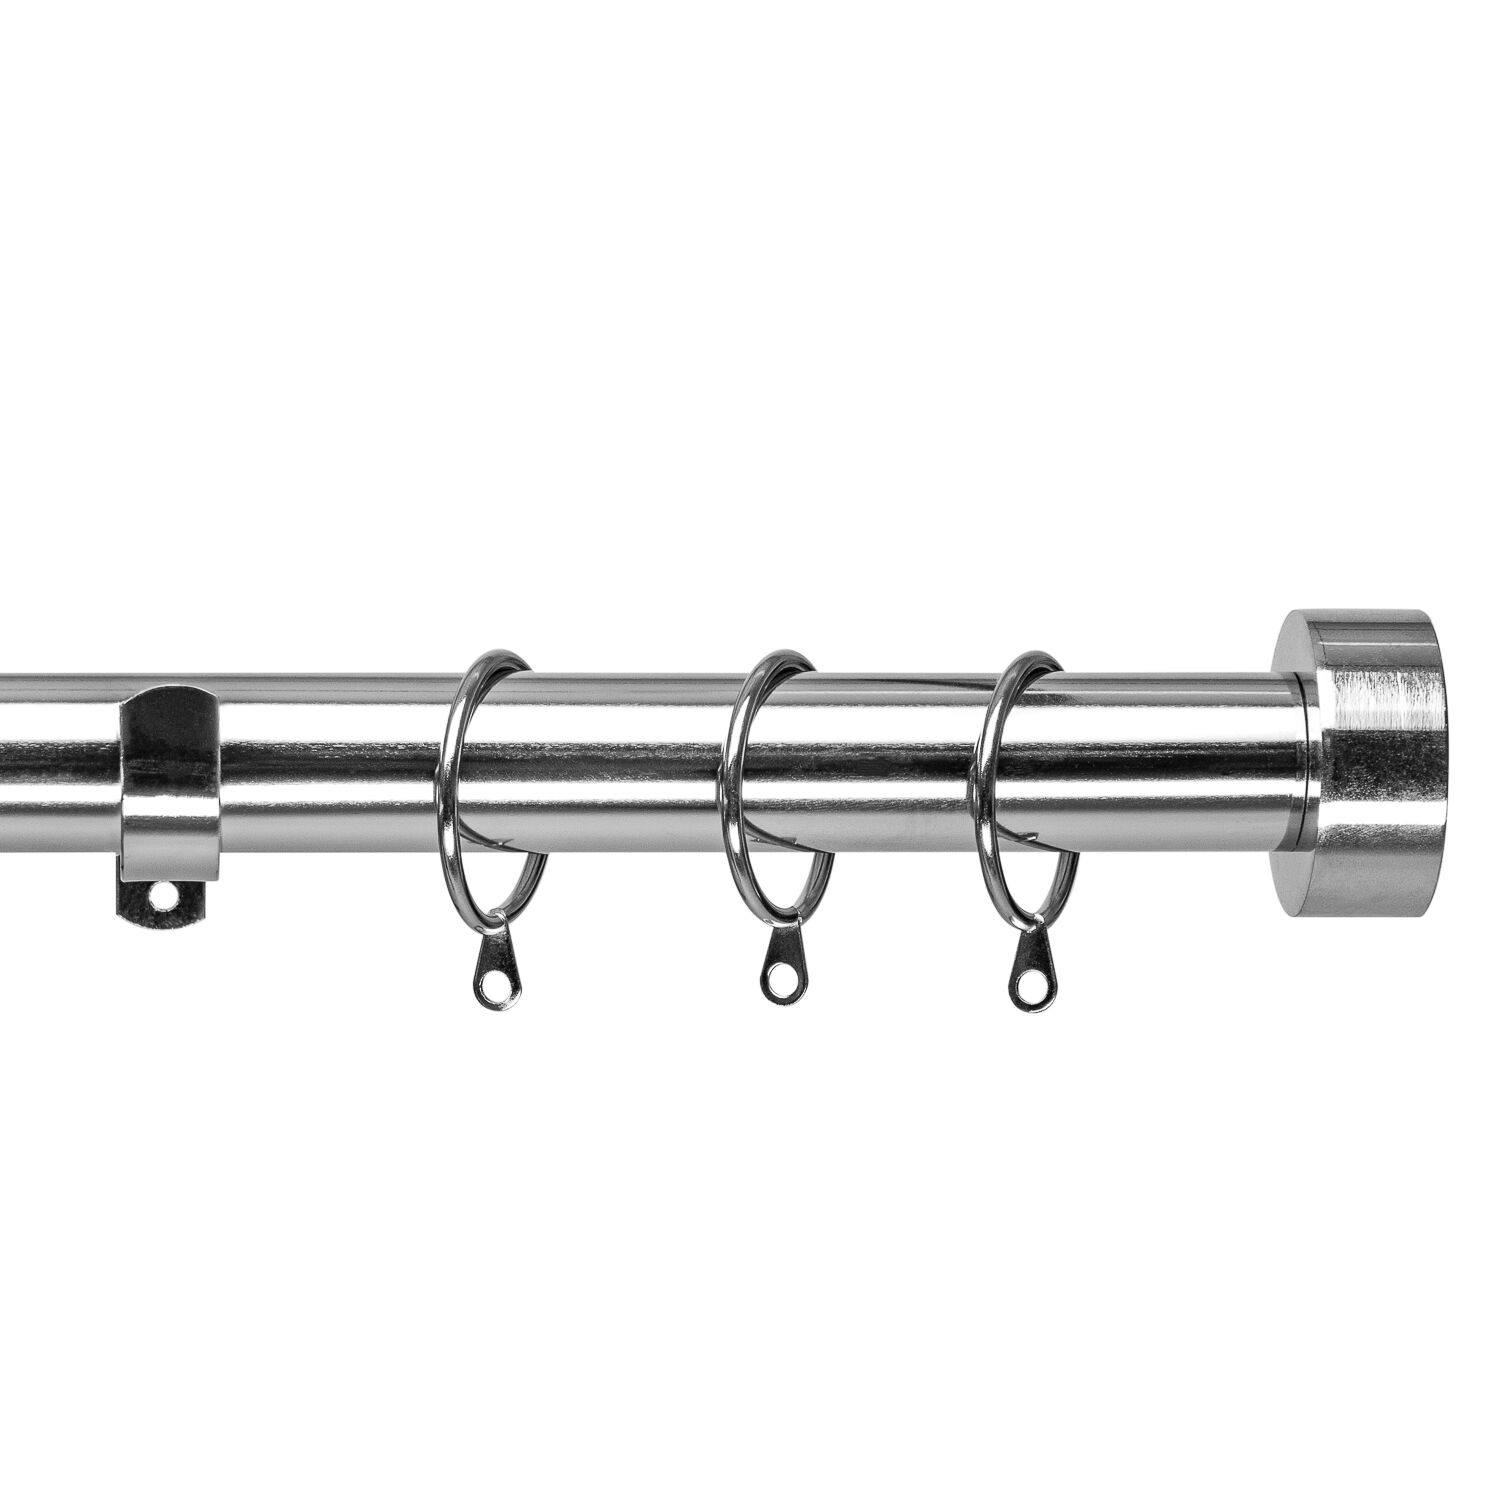 Mosaic Extendable Metal Curtain Rail 28mm Poles Includes Finials Rings Fittings 